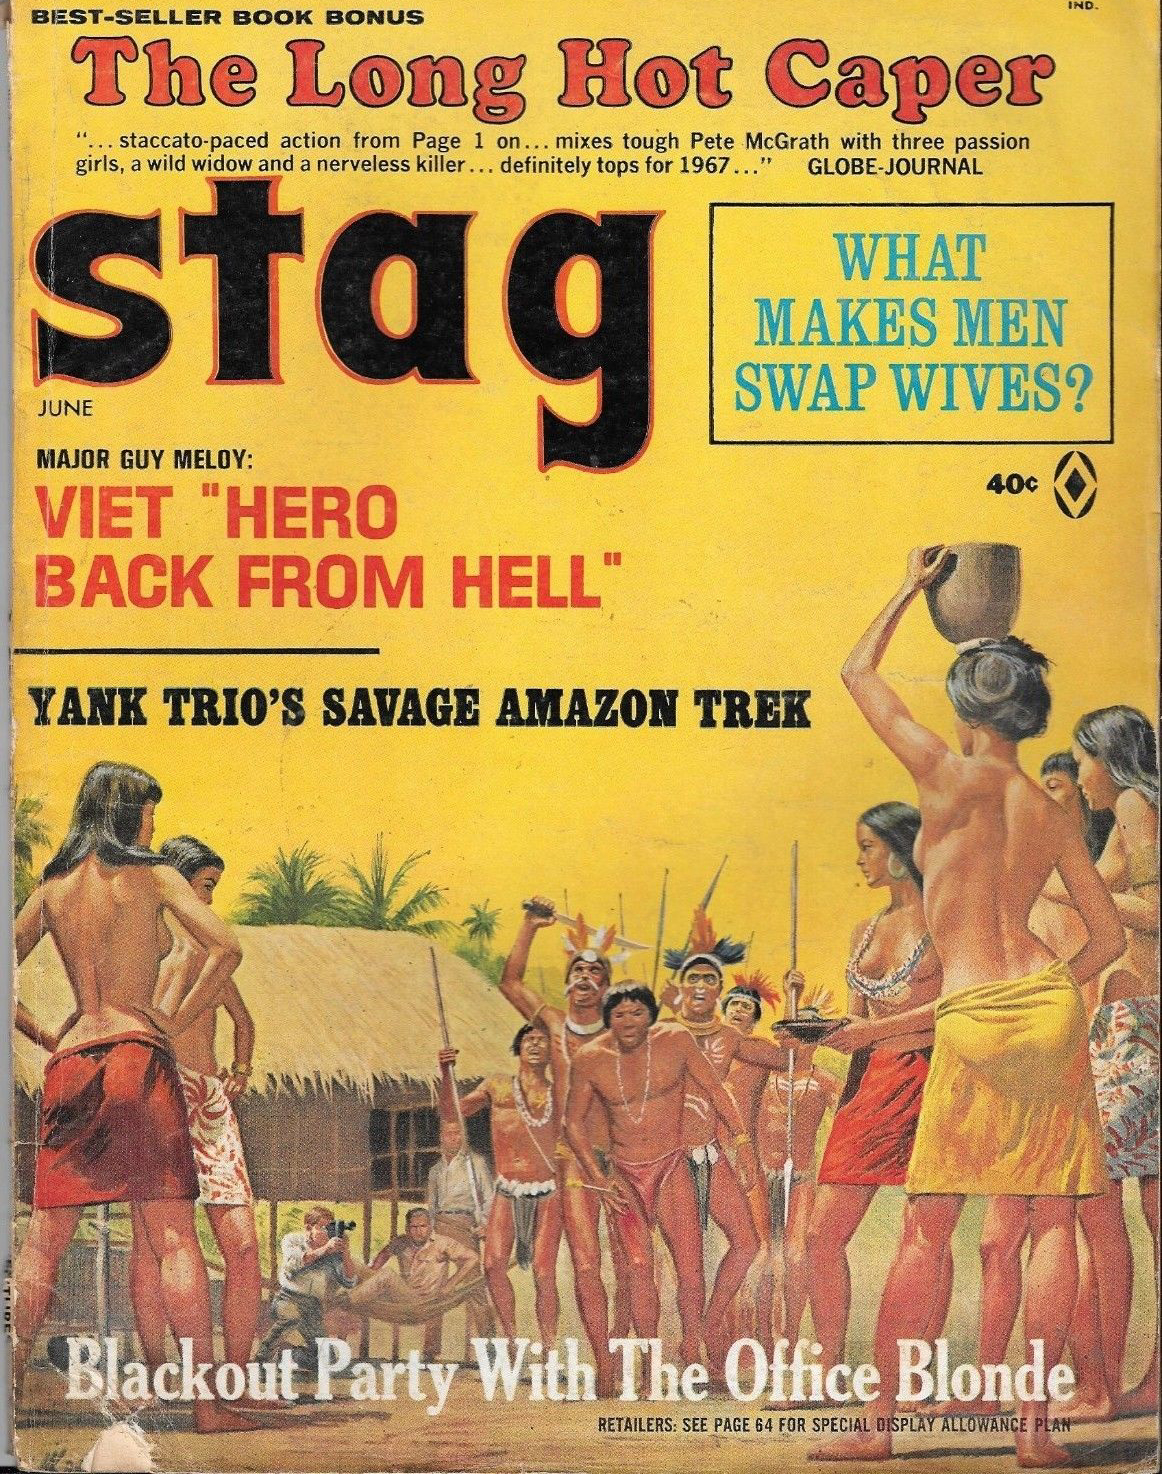 Stag June 1967 magazine back issue Stag magizine back copy Stag June 1967 Magazine for Men Adult Back Issue Published by Leeds Publishing Corp. Best - Seller Book Bonus The Long Hot Caper.